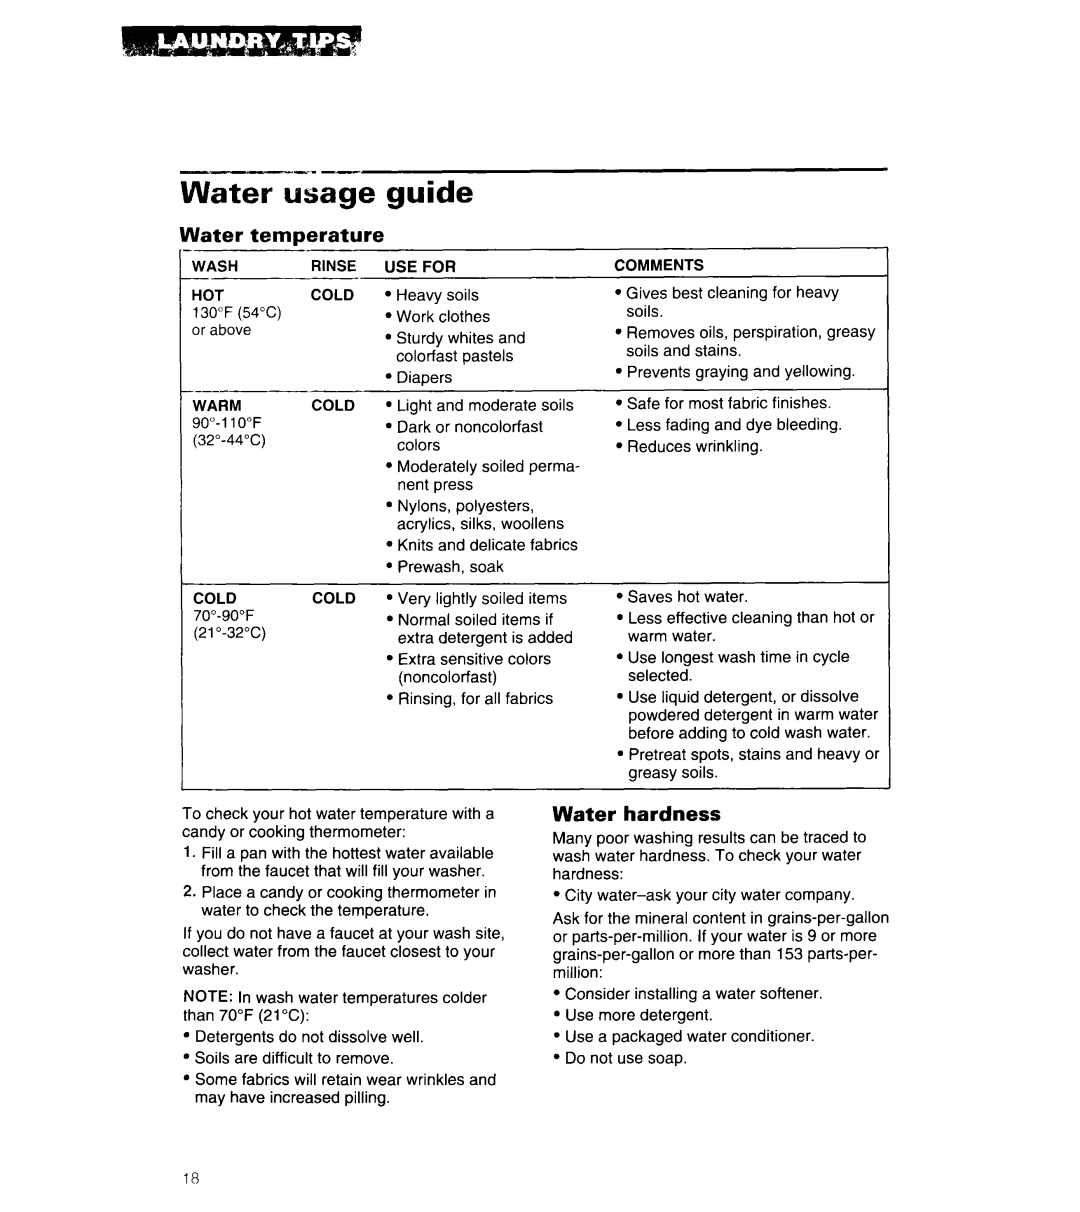 Whirlpool 3360461 warranty Water usage guide, temperature, Water hardness 